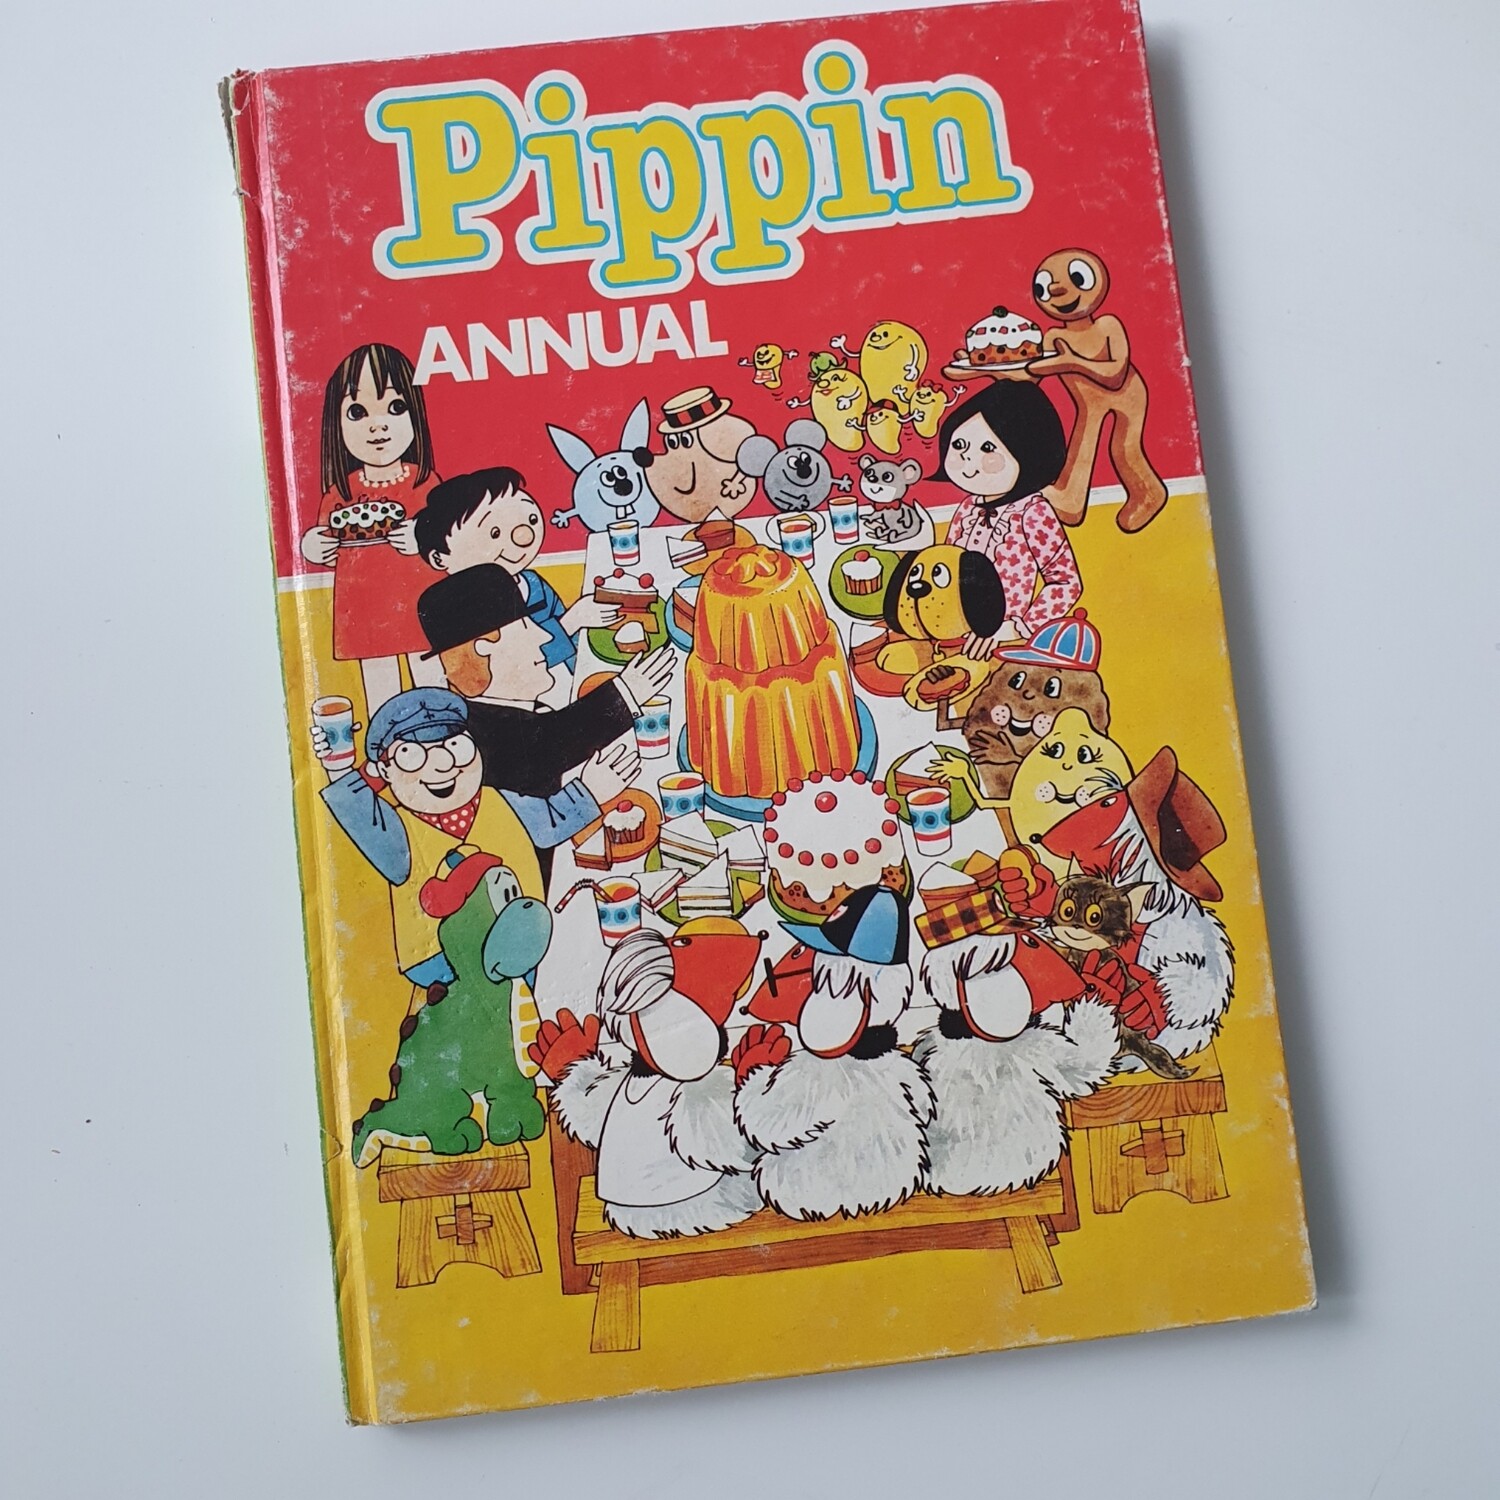 Pippin 1984 Ivor the engine, the munch bunch, andy pandy, Mr Benn, Morph , wombles